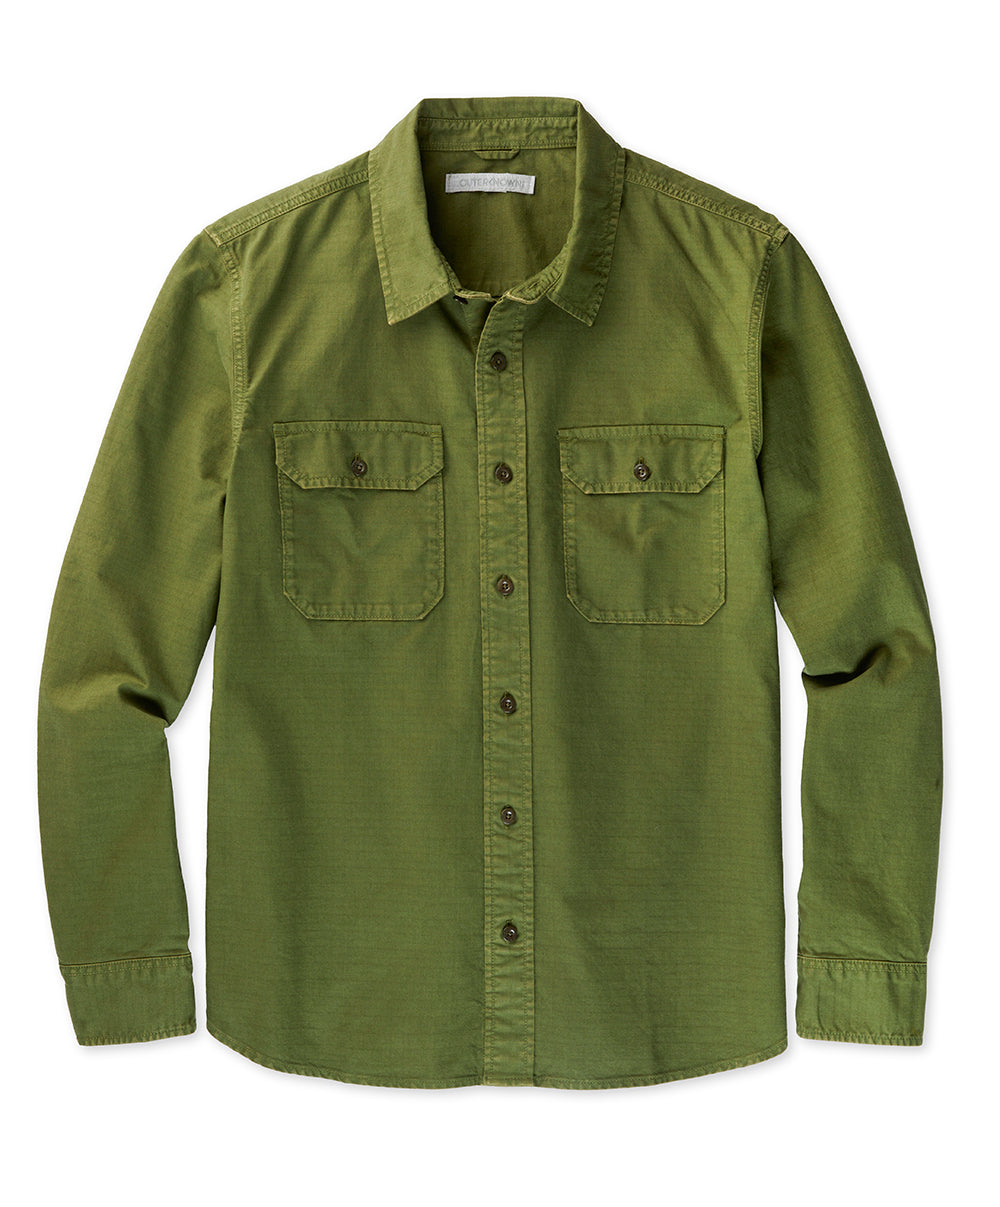 OUTERKNOWN THE UTILITARIAN SHIRT IN OLIVE DRAB